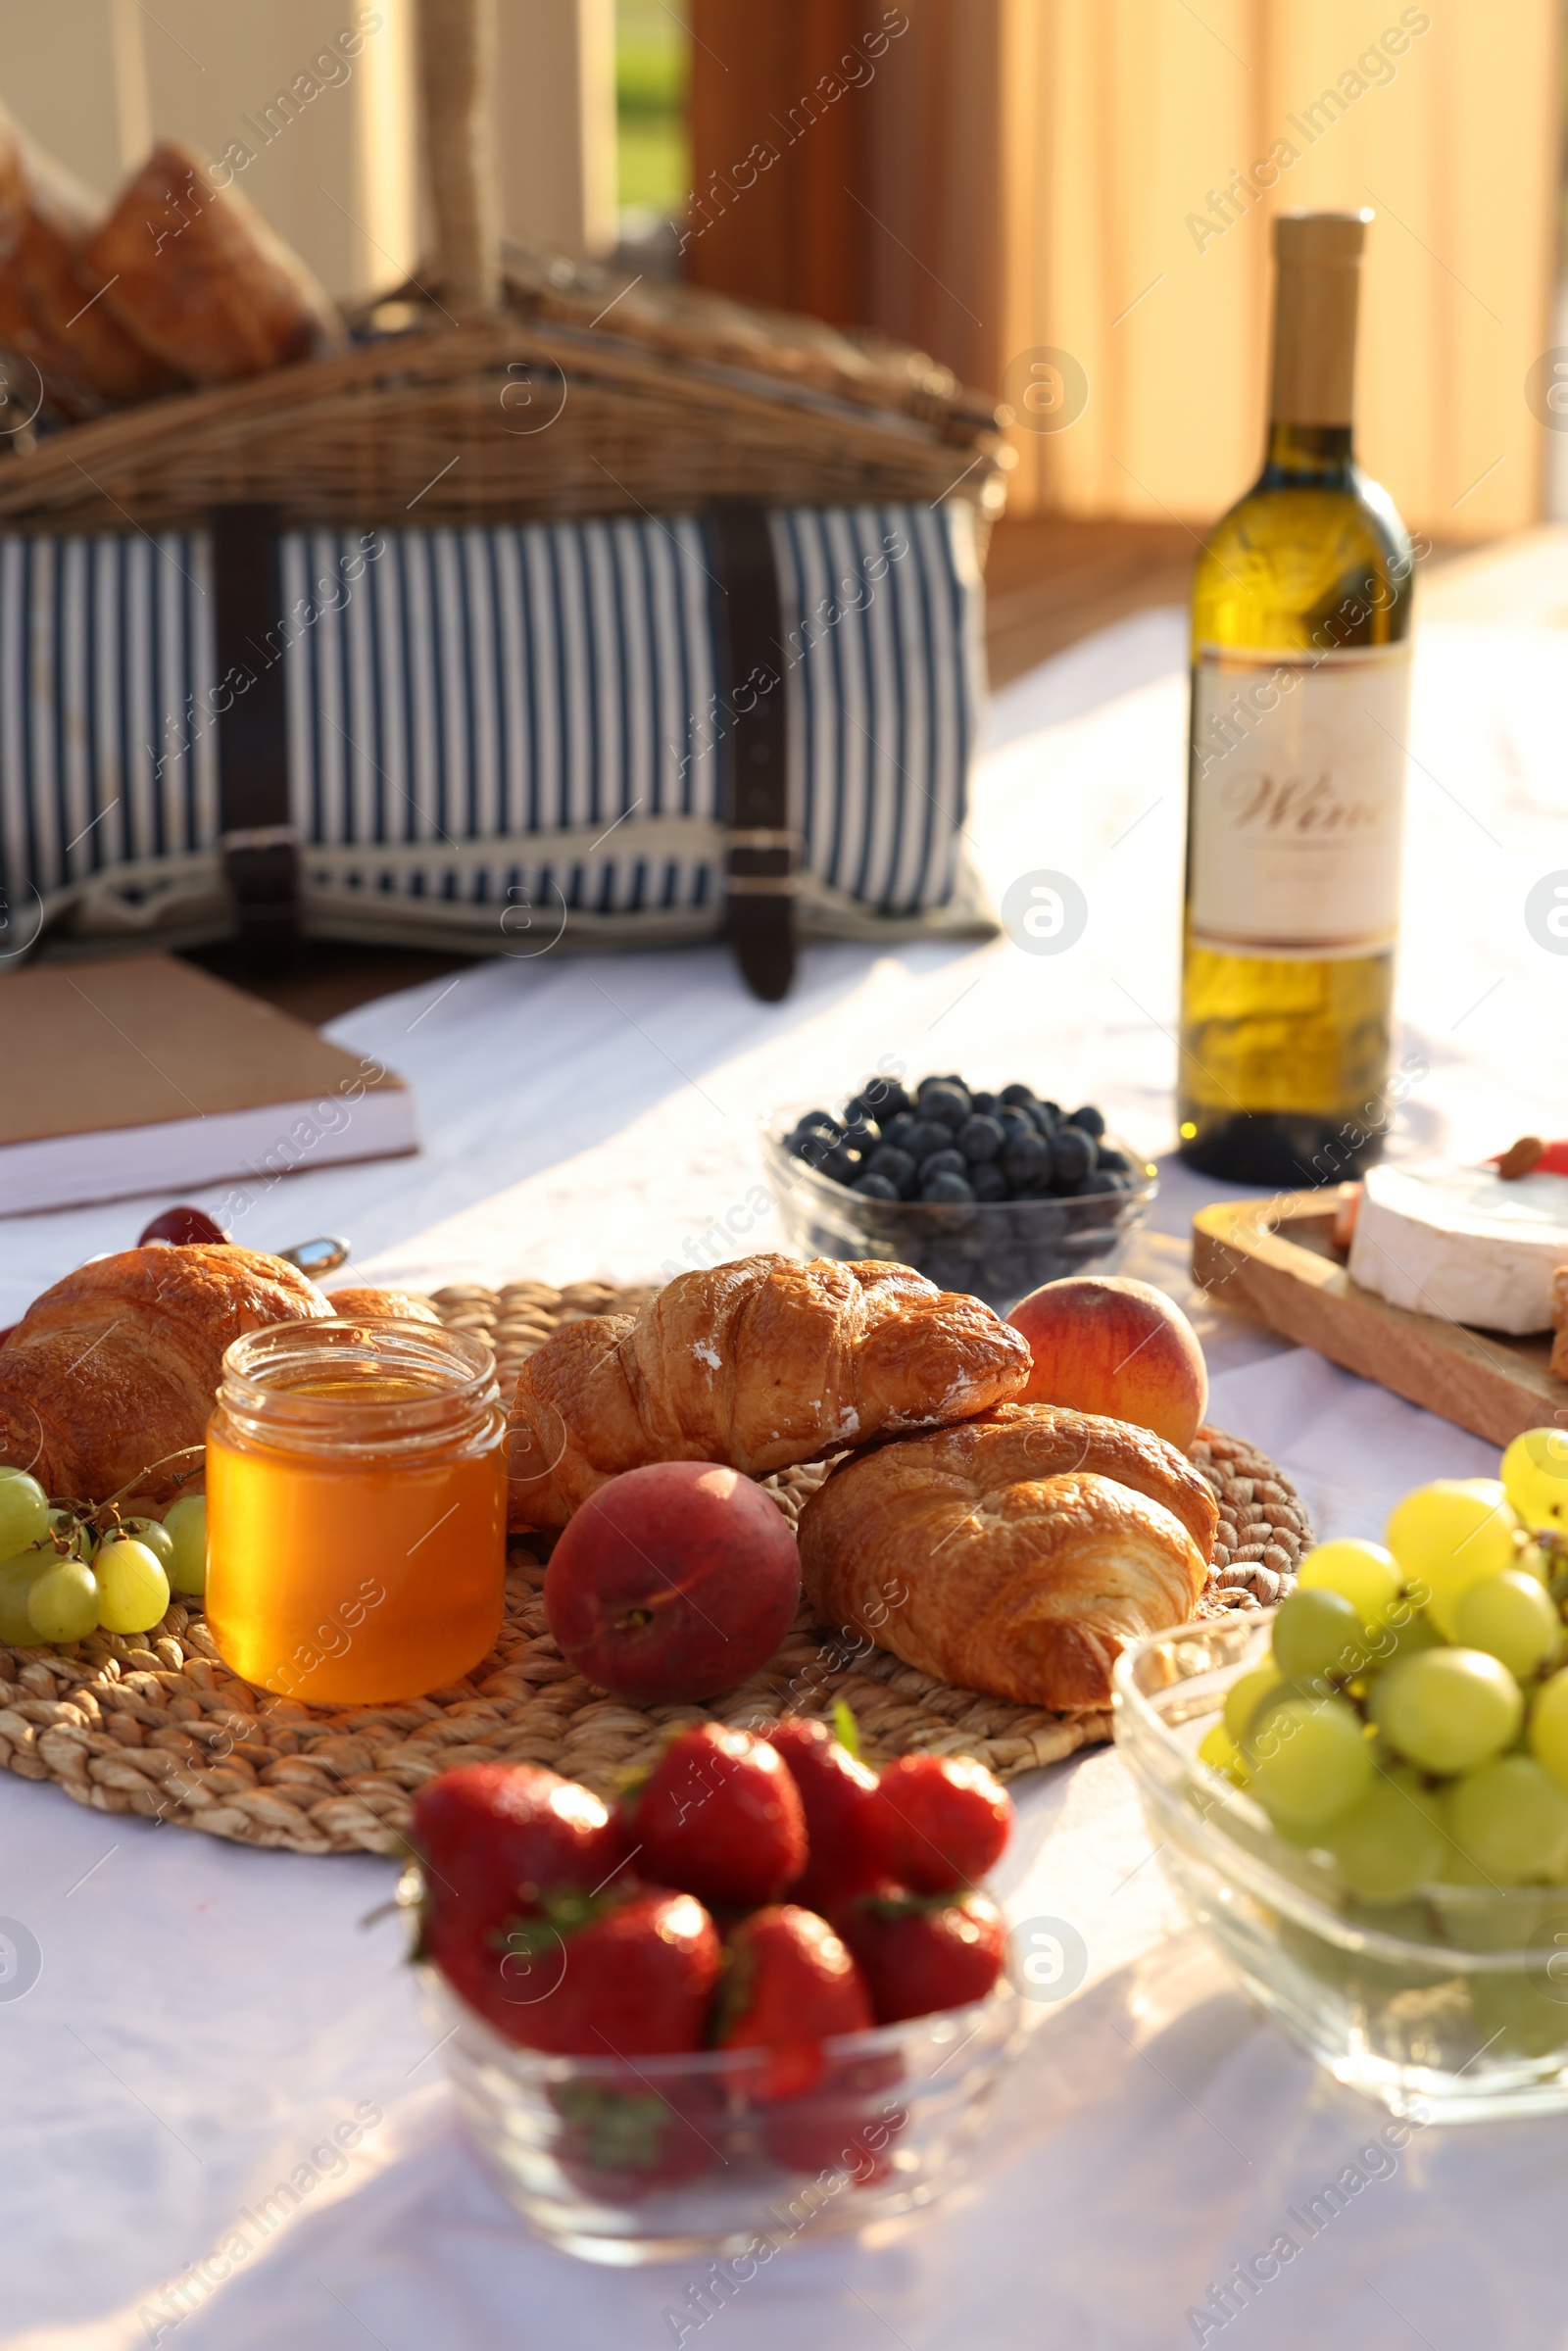 Photo of Romantic date. Delicious snacks for picnic on white blanket outdoors